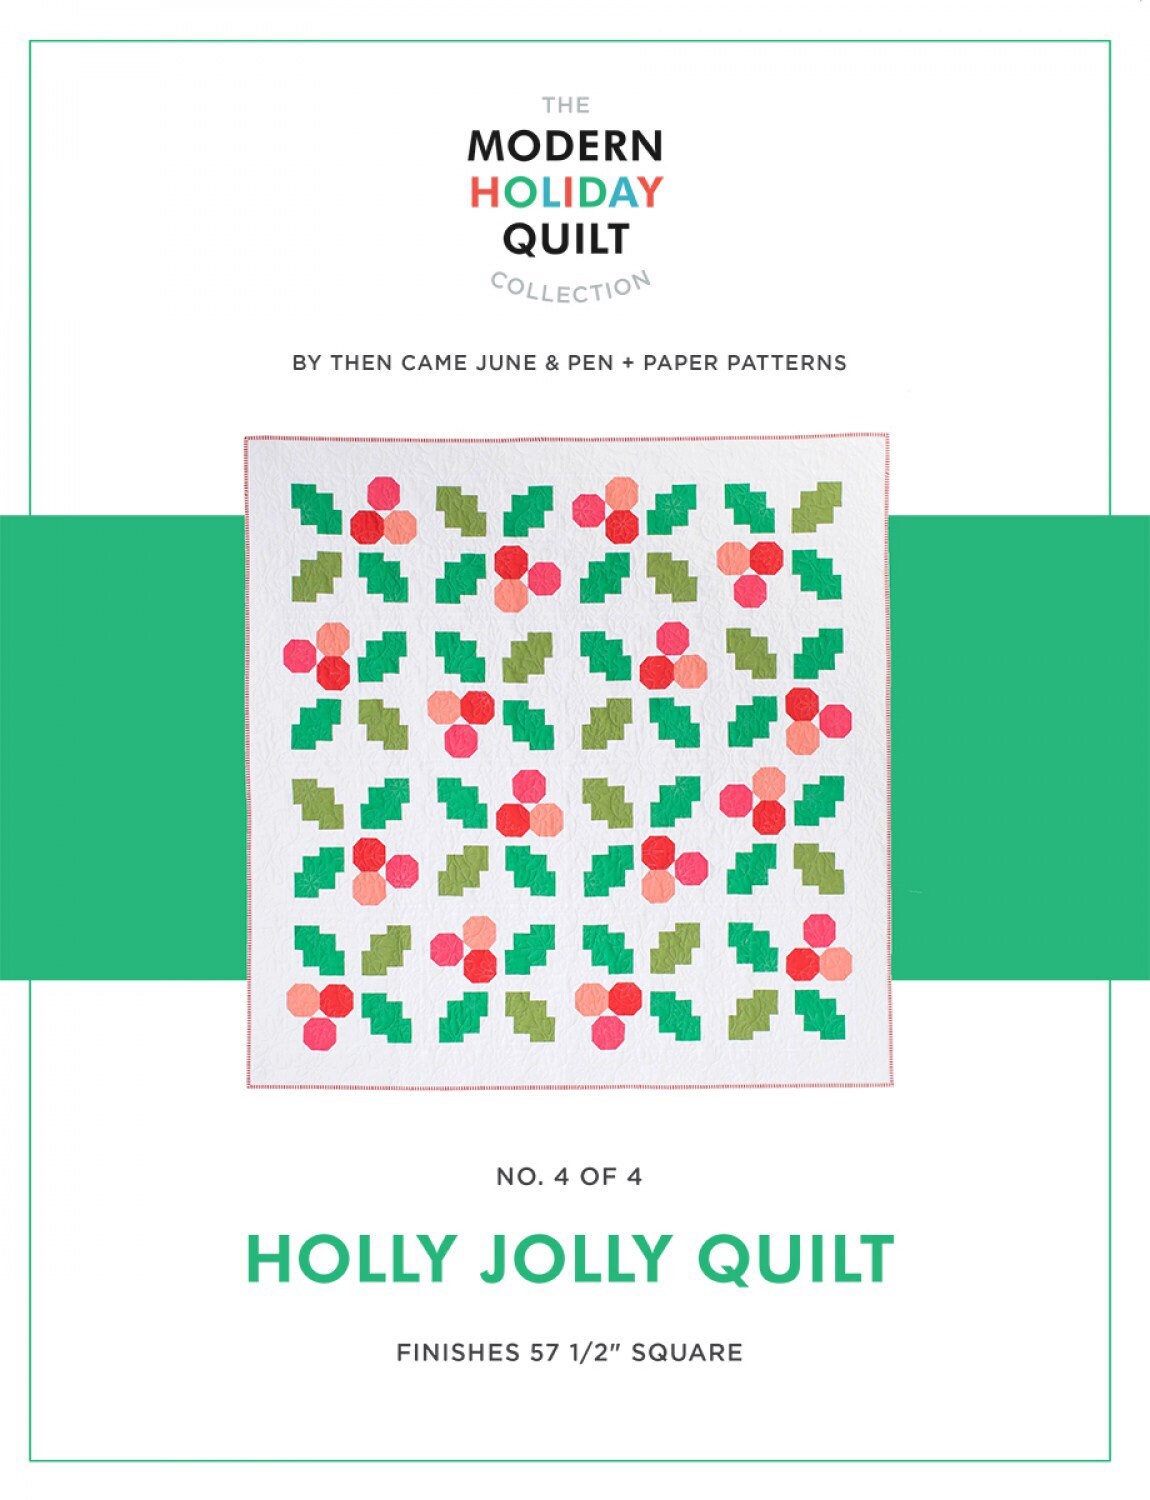 Holly Jolly Quilt Pattern - Pen and Paper Patterns - Lindsey Neill - Meghan Buchanan - Then Came June